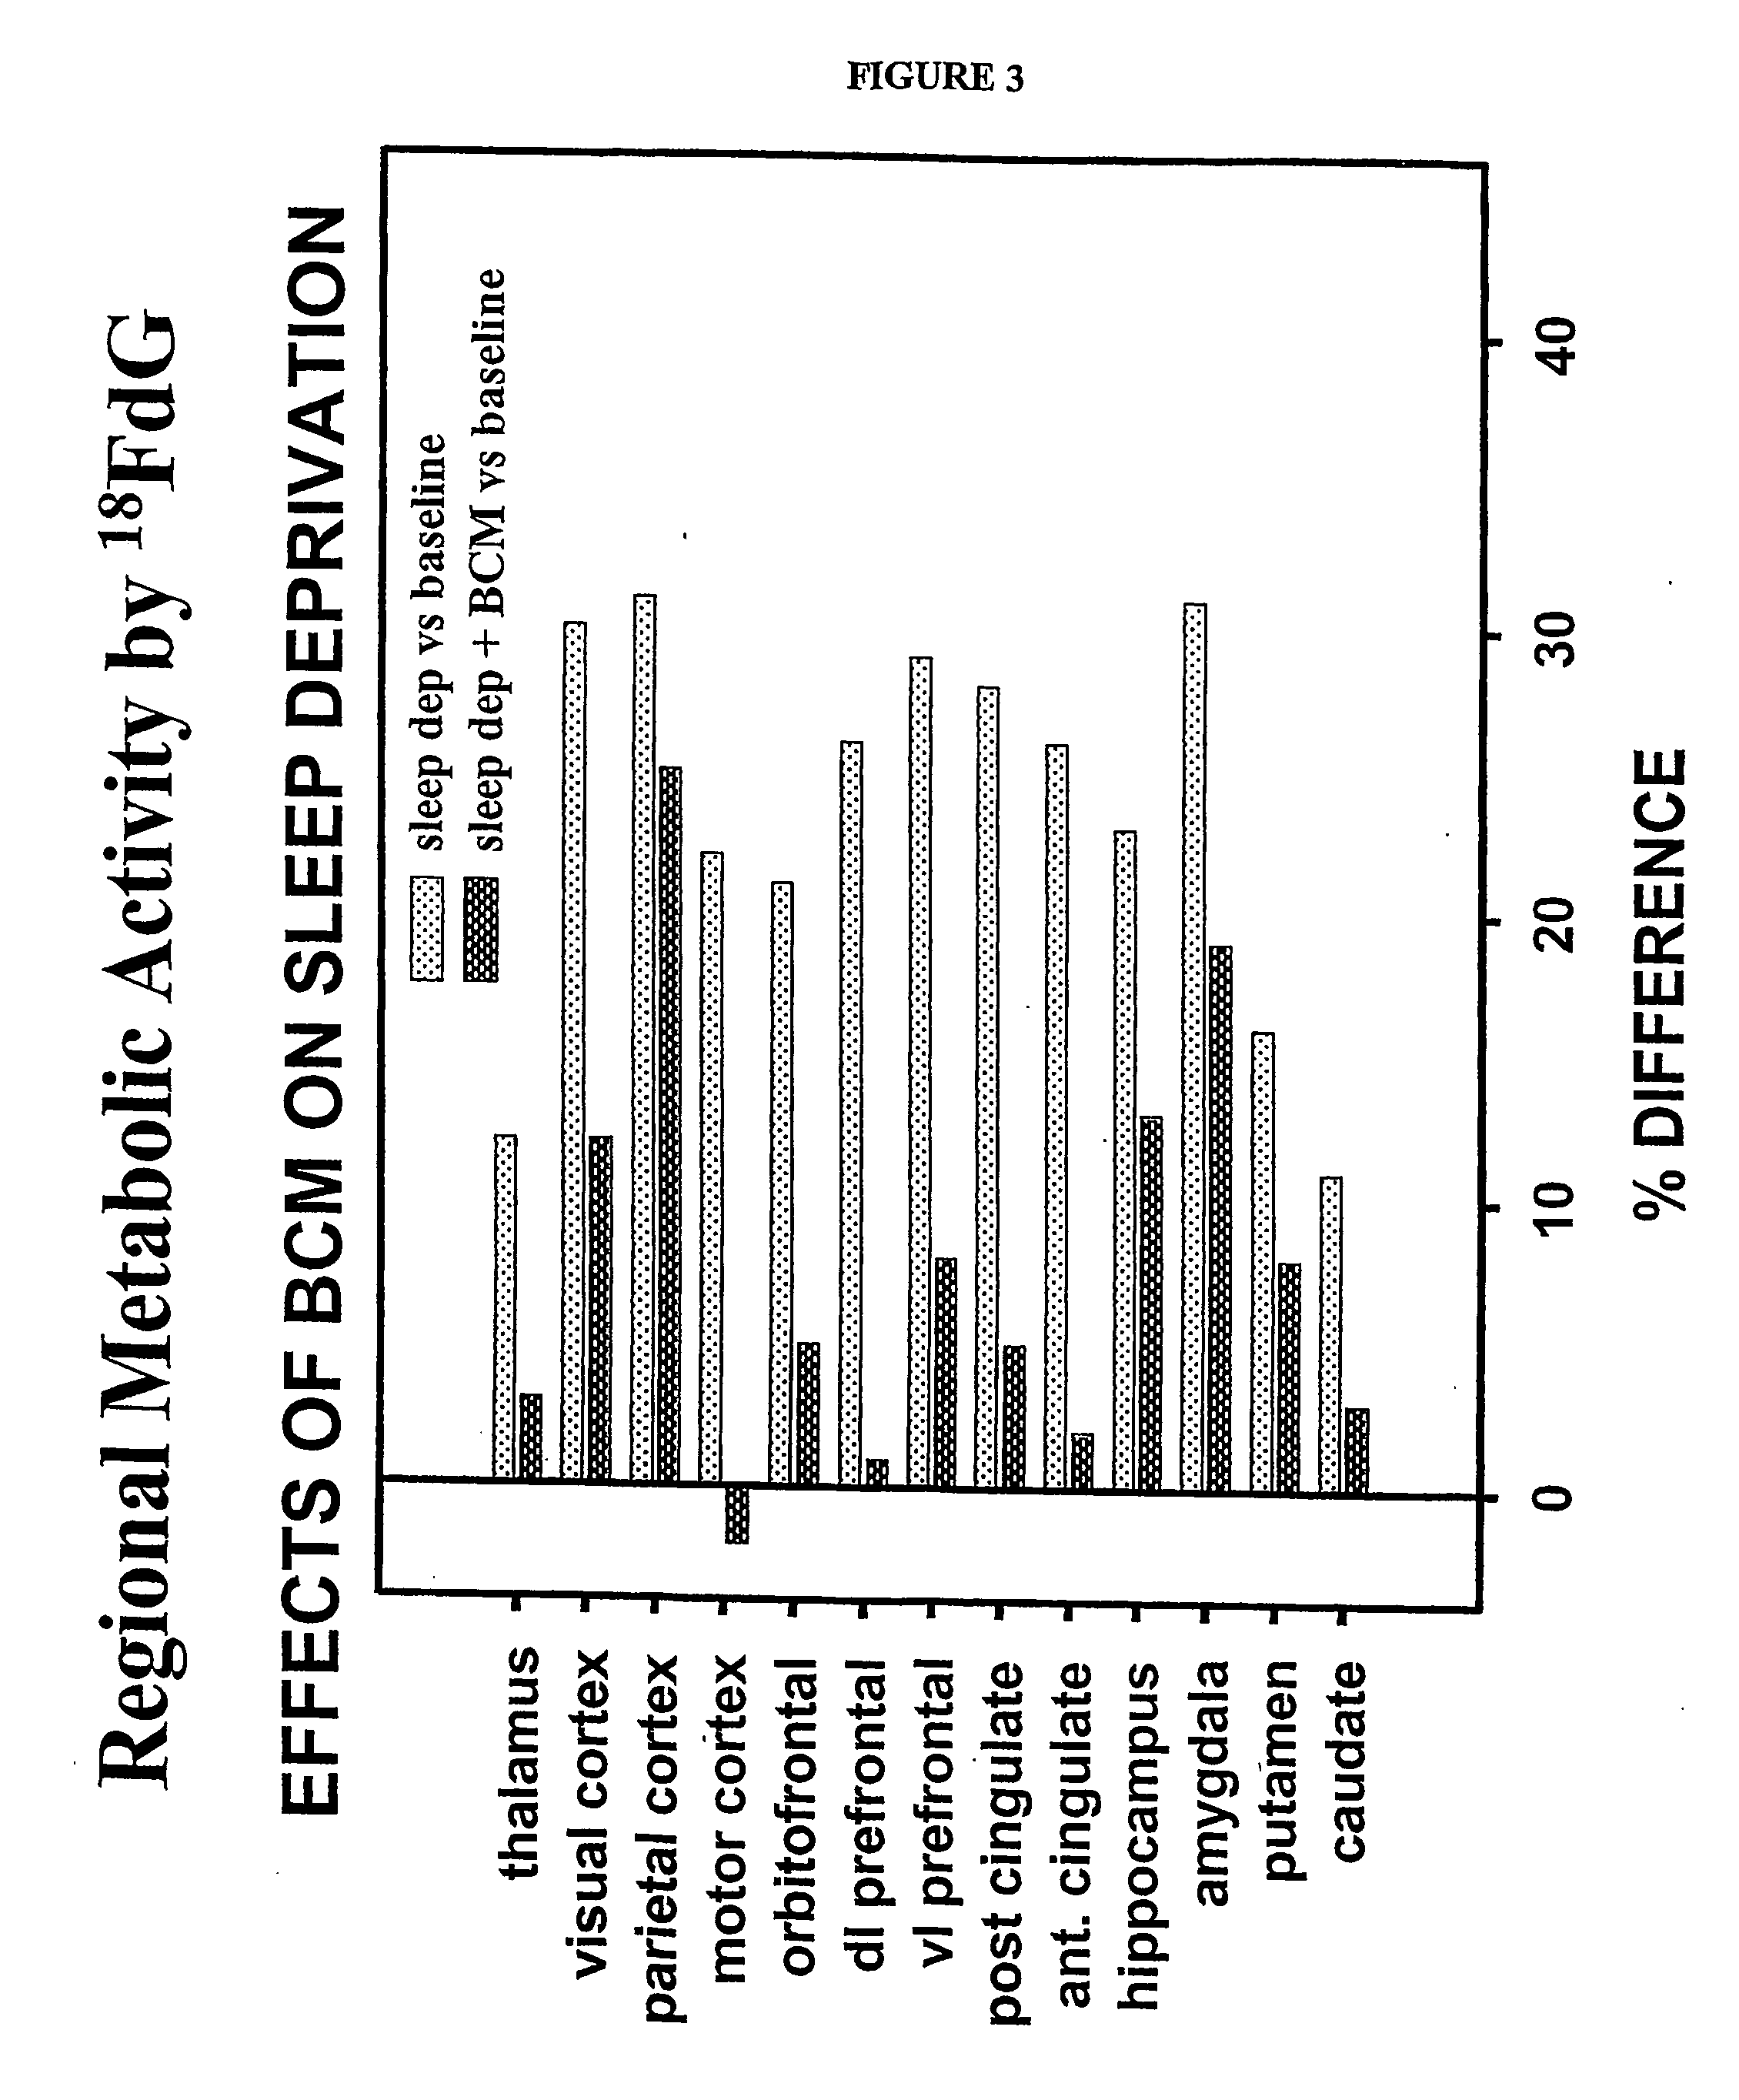 Method of treating cognitive decline due to sleep deprivation and stress